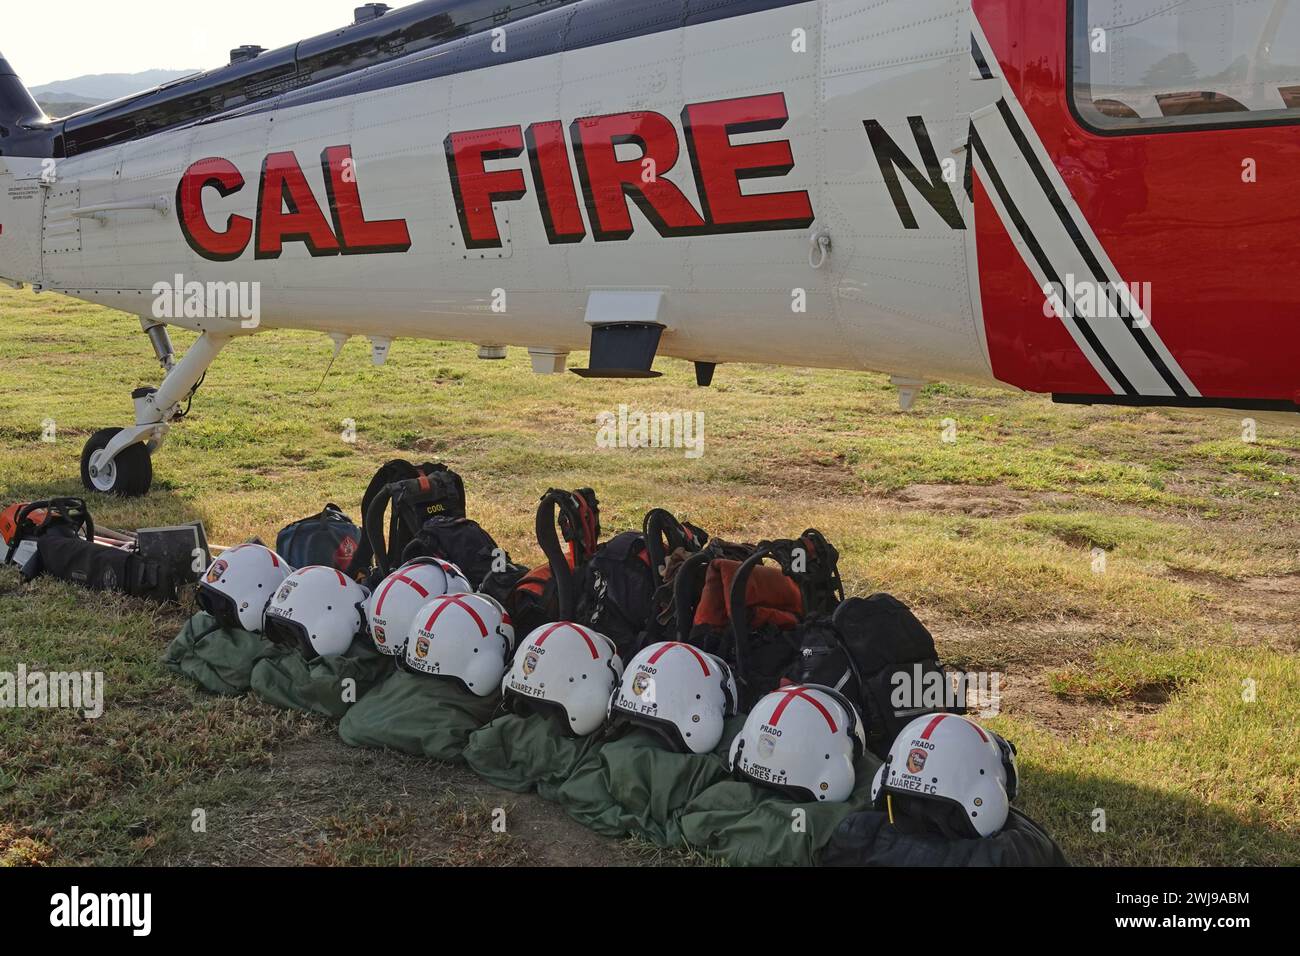 Los Angeles, California, USA - Nov. 4, 2023: A Cal Fire Sikorsky S-70i helicopter is shown with firefighting equipment and flight crew helmets. Stock Photo